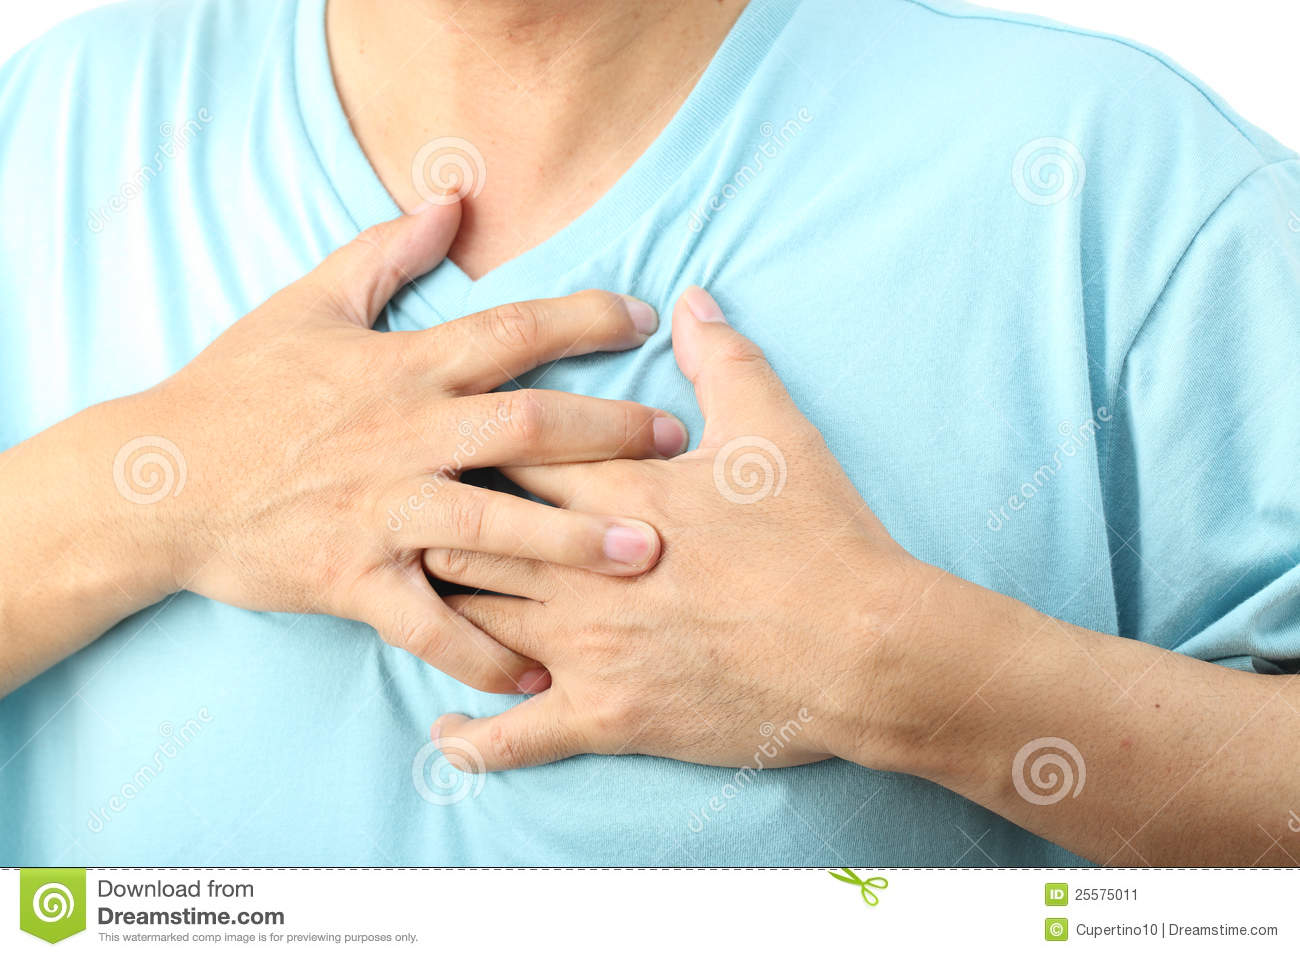 Chest Pain Stock Image   Image  25575011